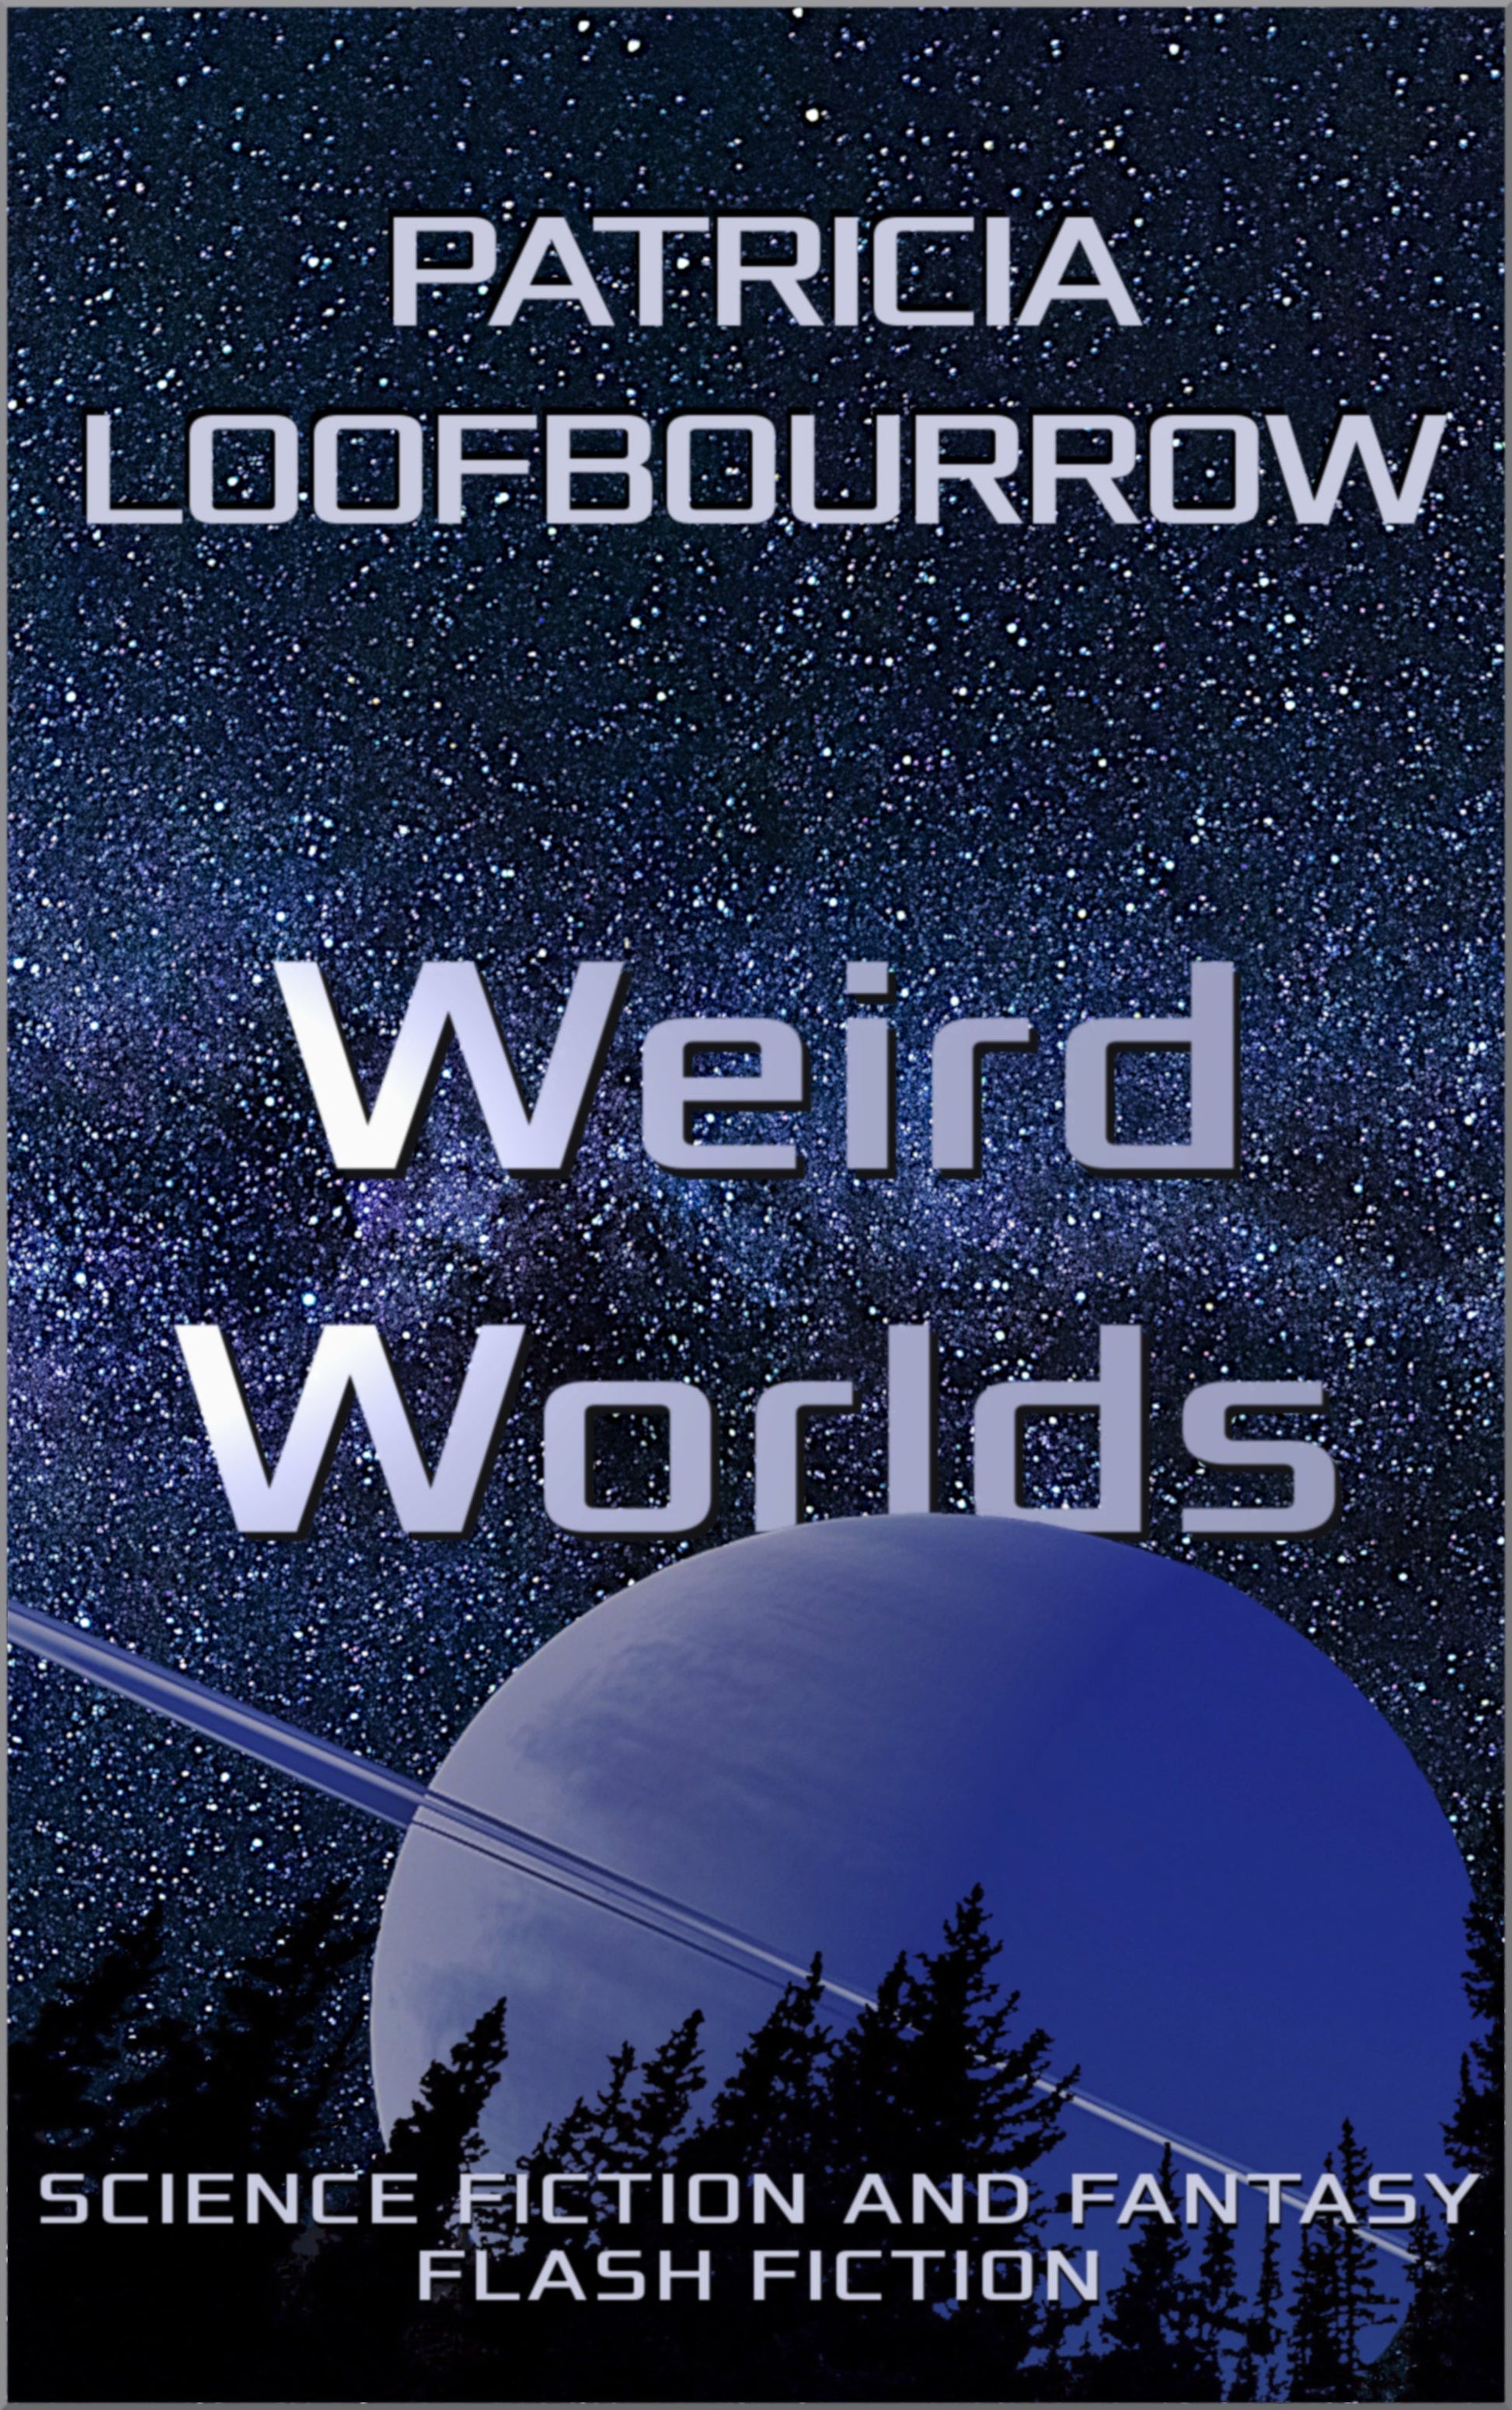 Weird Worlds: Science Fiction and Fantasy Flash Fiction [Kindle and ePUB] - Patricia Loofbourrow